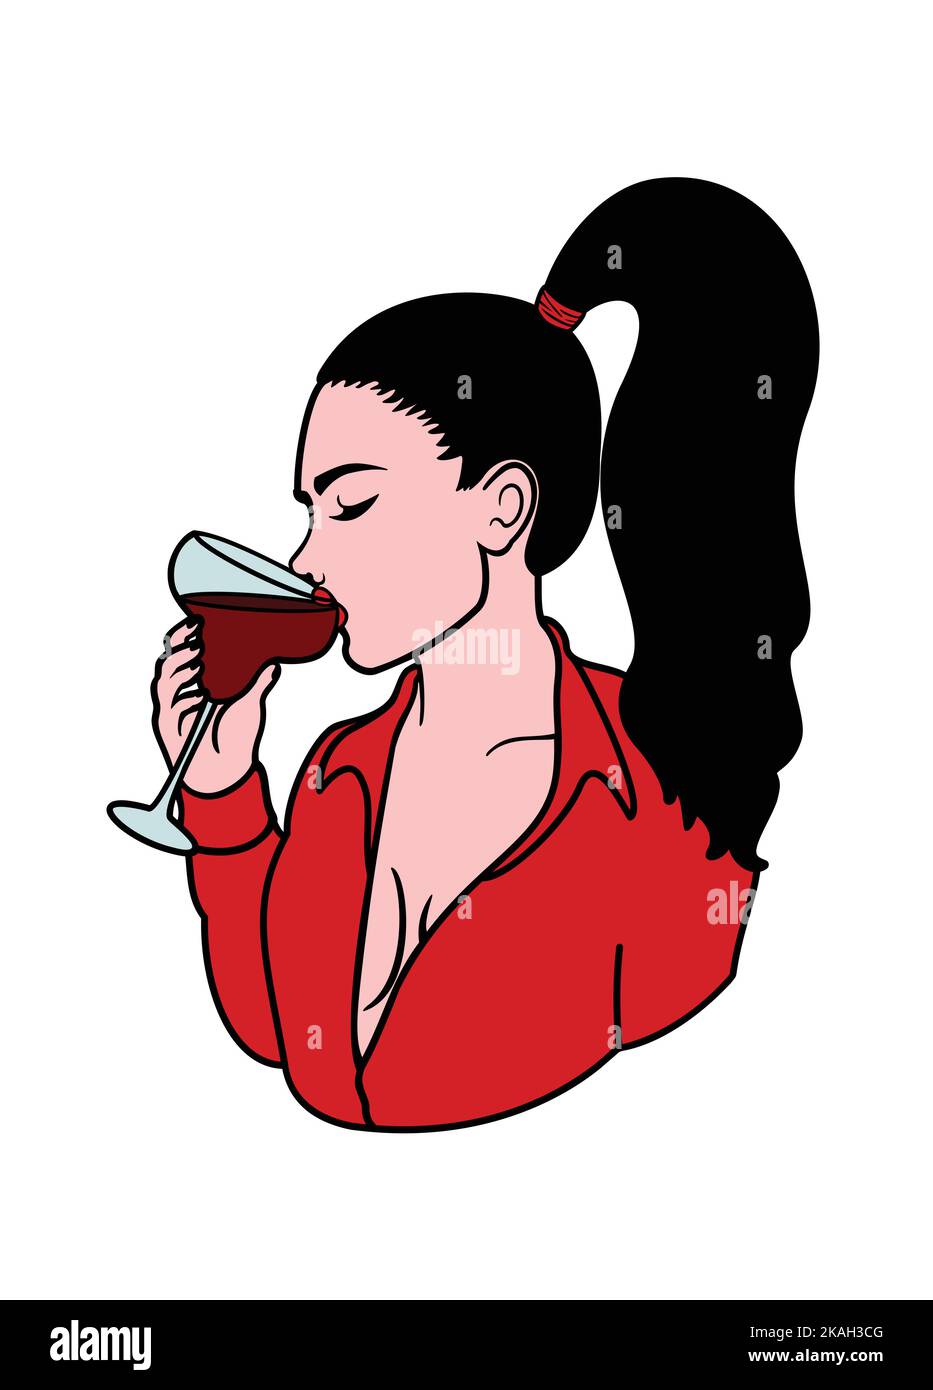 Woman drinking red wine. Stock Vector